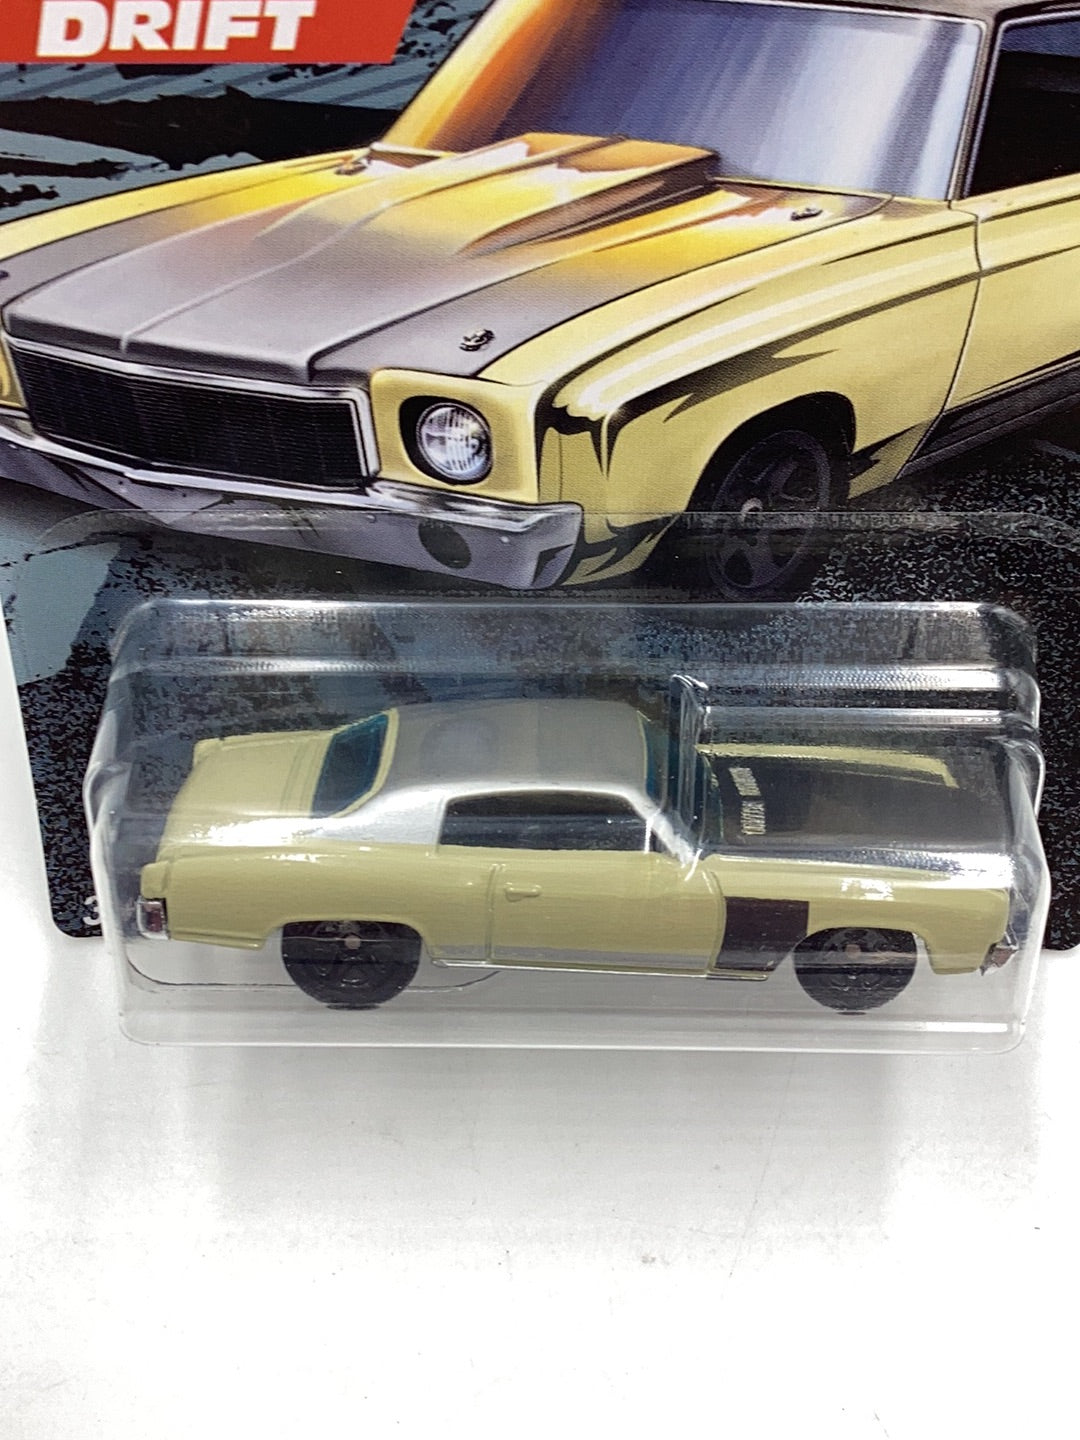 Hot wheels Fast and Furious 4/8 70 Monte Carlo 151i